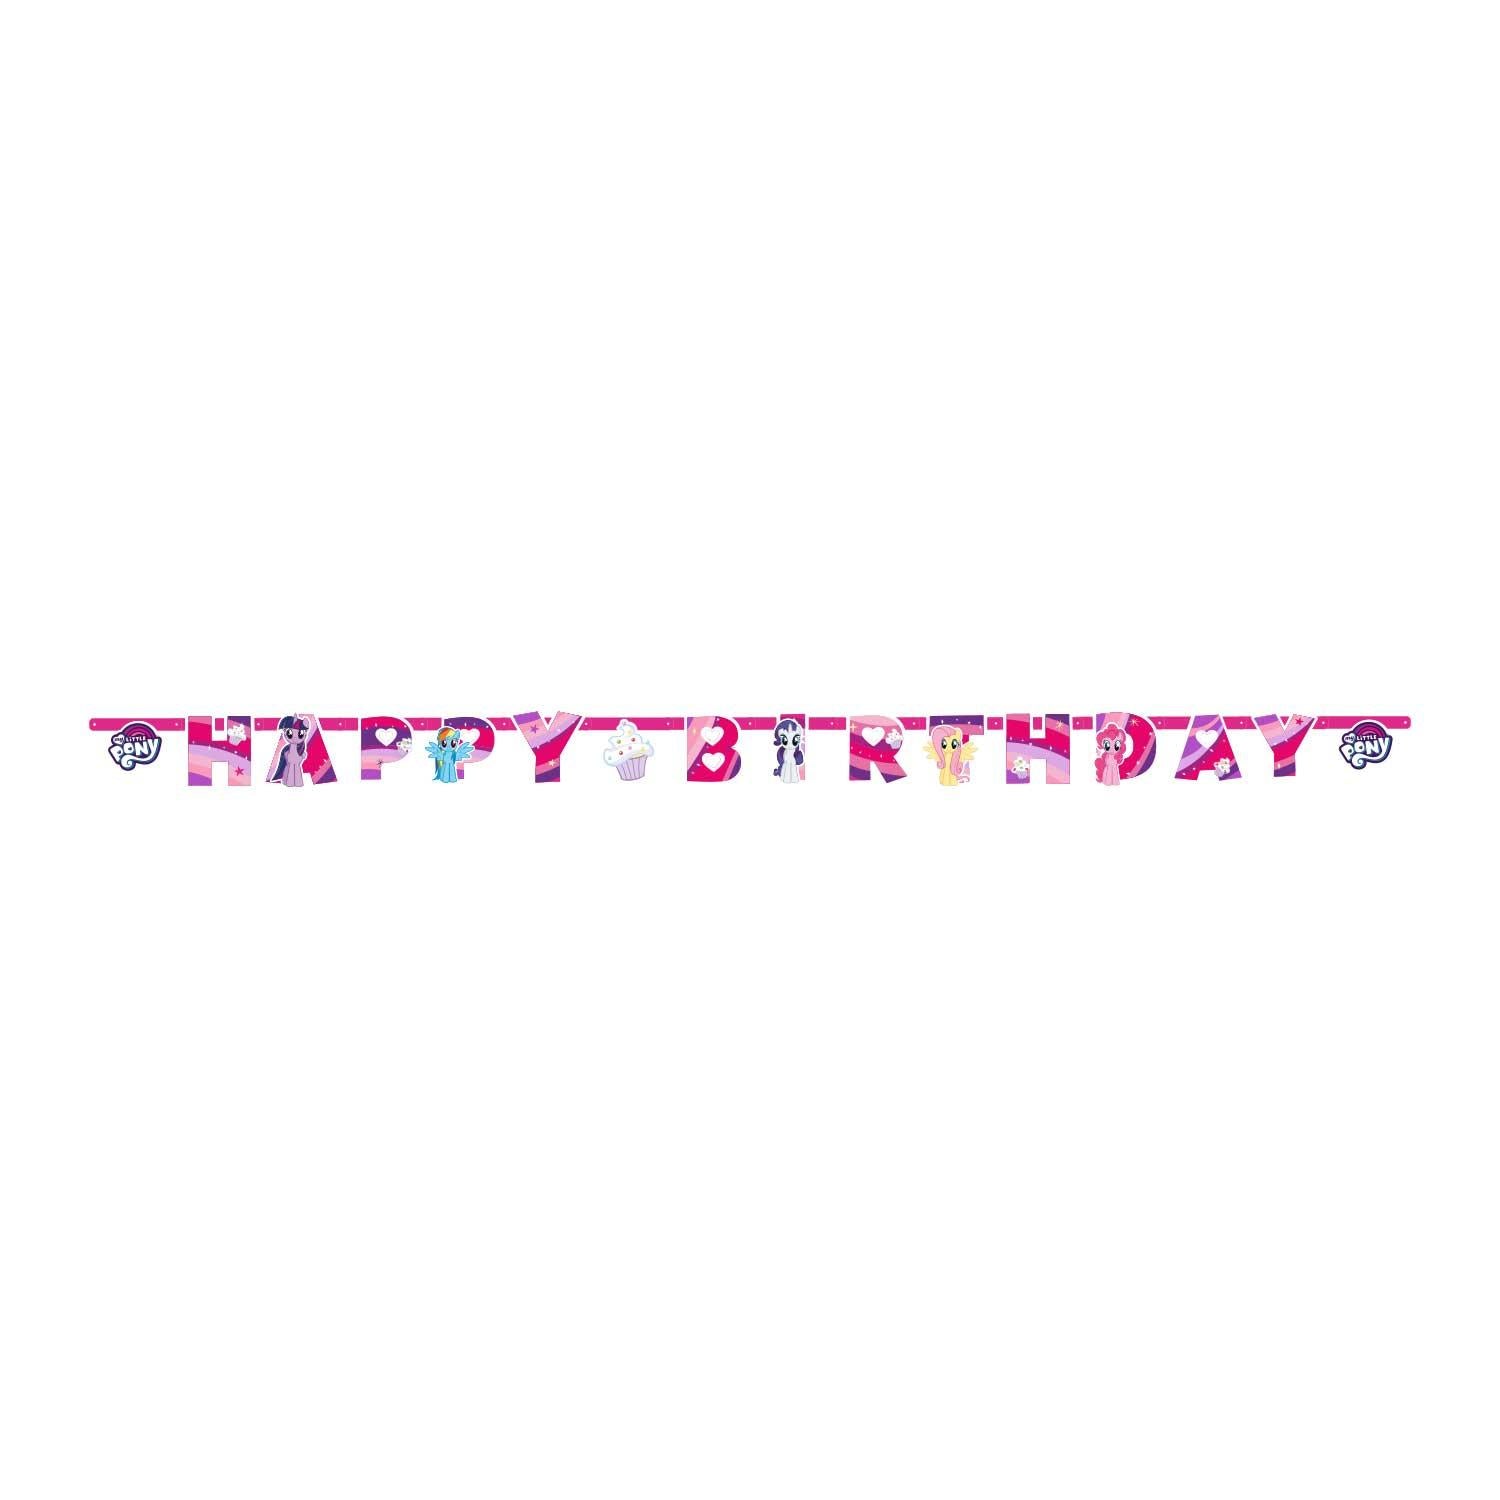 My Little Pony Letter Banner Decorations - Party Centre